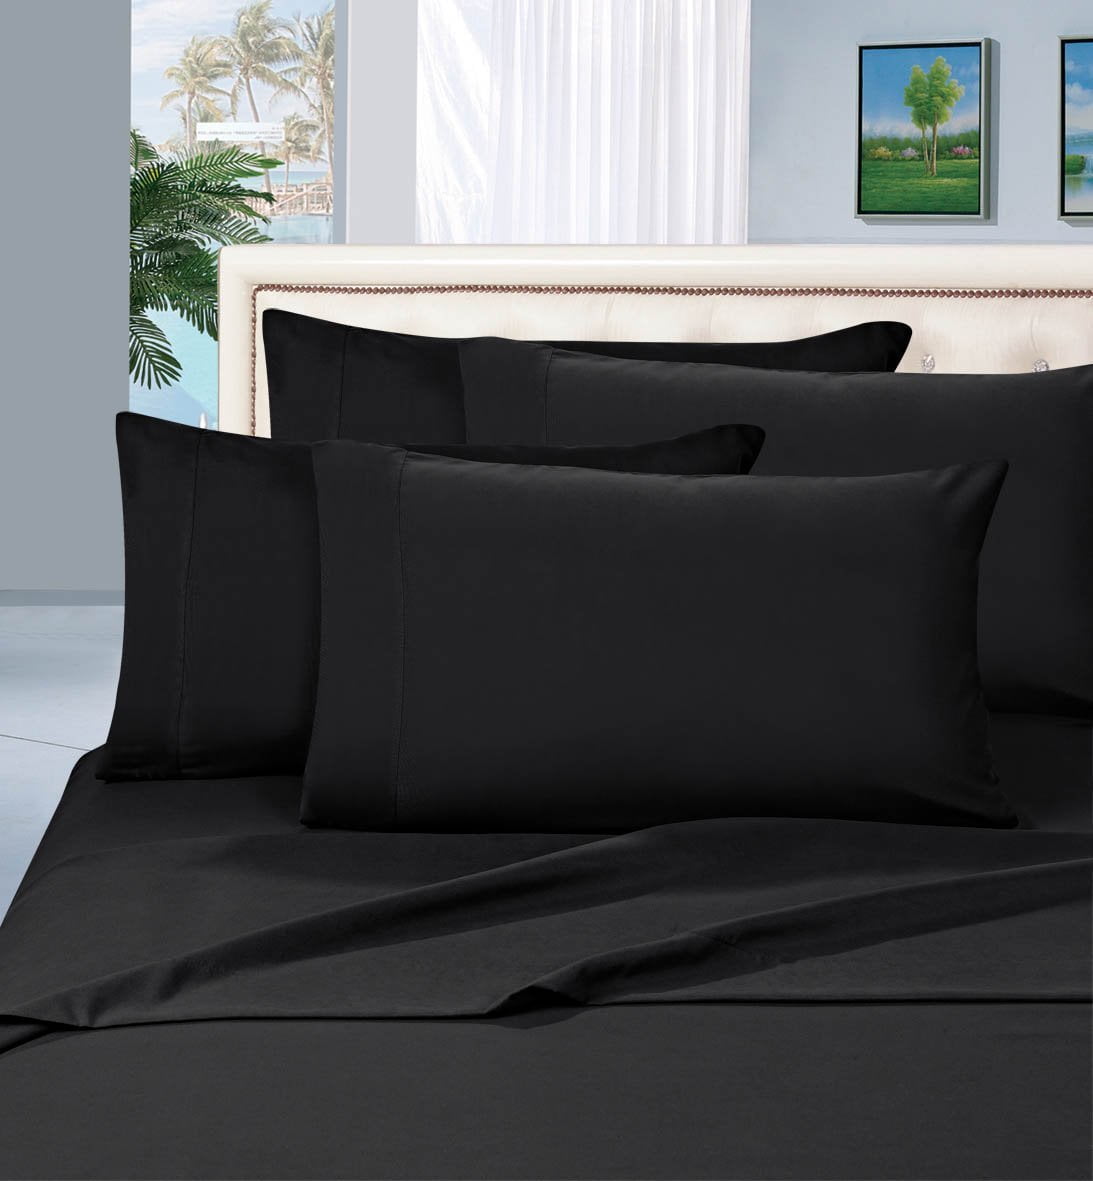 Wrinkle Free 4 Piece Bed Sheet Set, King Size Bed Sheets Dimensions In Inches